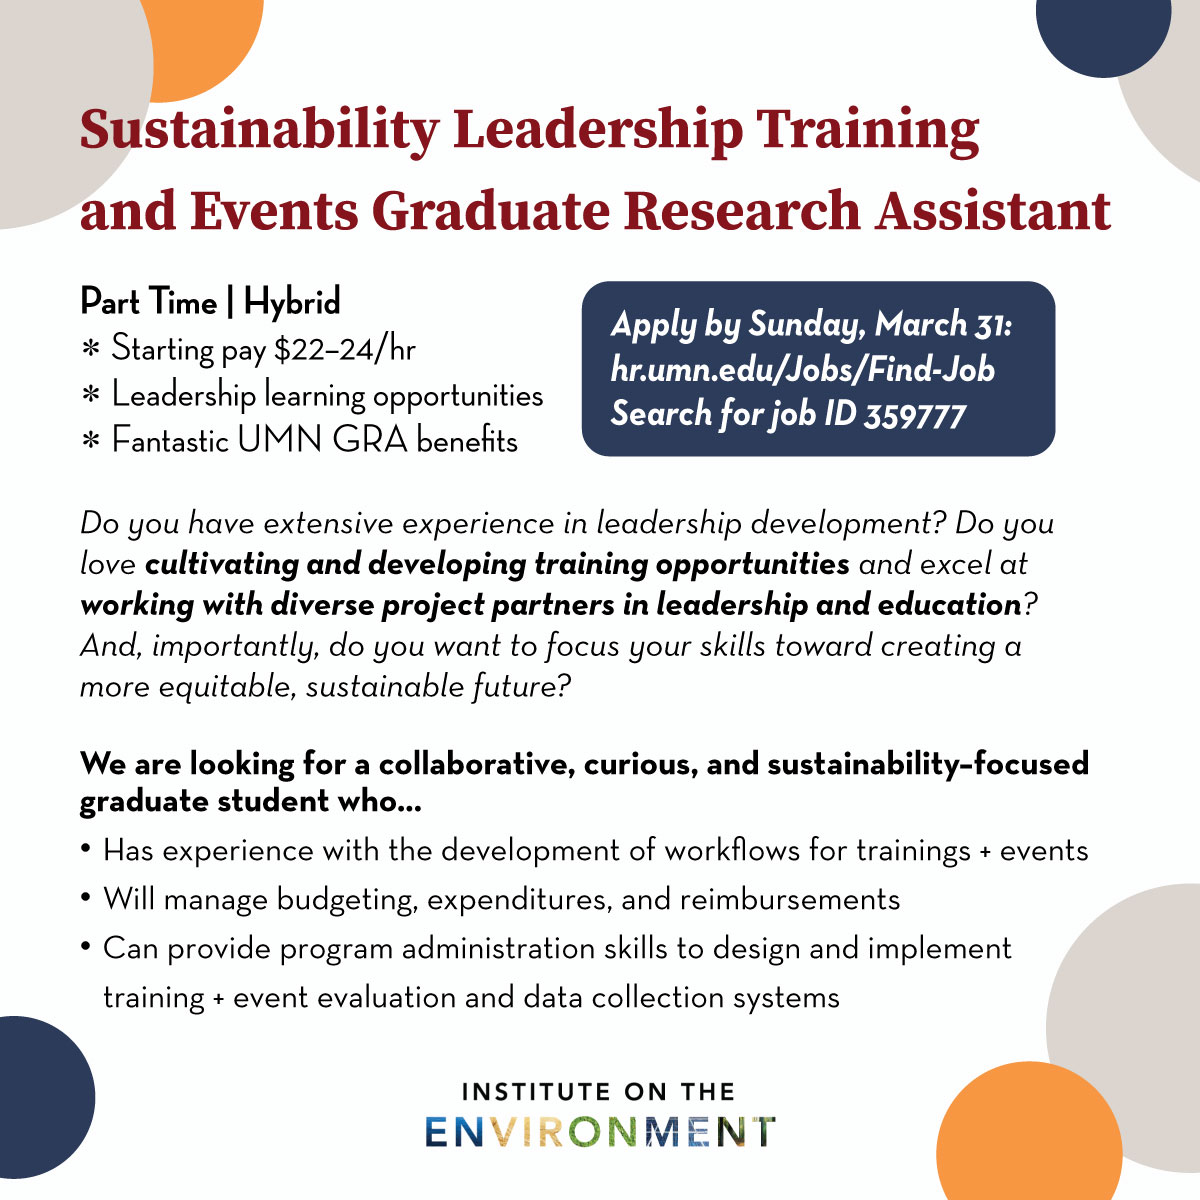 We're hiring a Graduate Research Assistant to support the development and implementation of IonE's leadership training + events for graduate programs! This position is for the 2024 summer term, w/ the possibility of extension. Apply by March 31: hr.umn.edu/Jobs/Find-Job